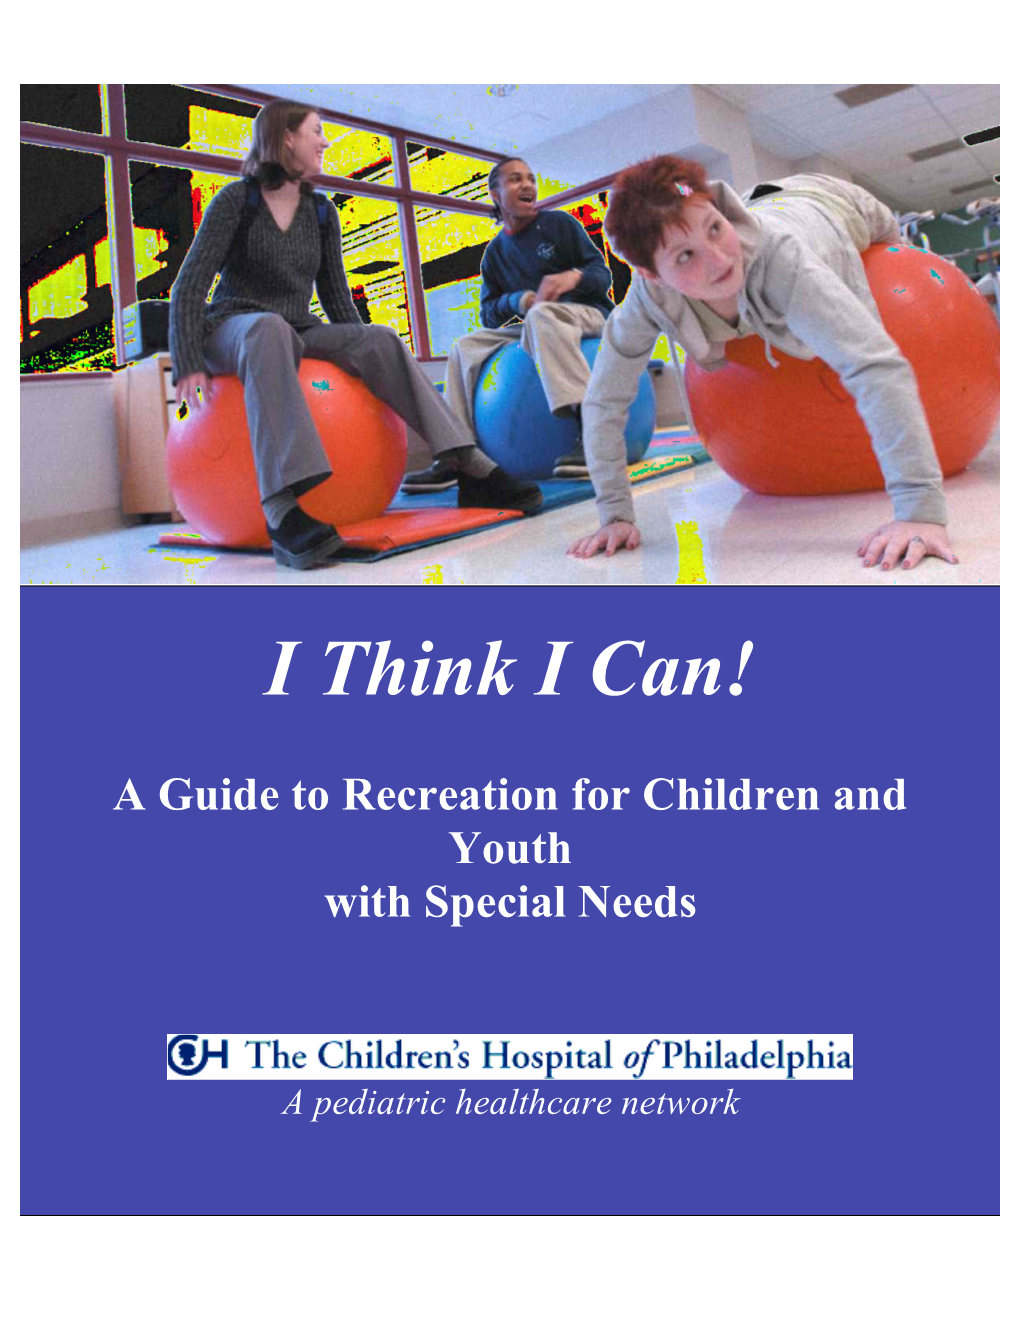 A Guide to Recreation for Children and Youth with Special Needs